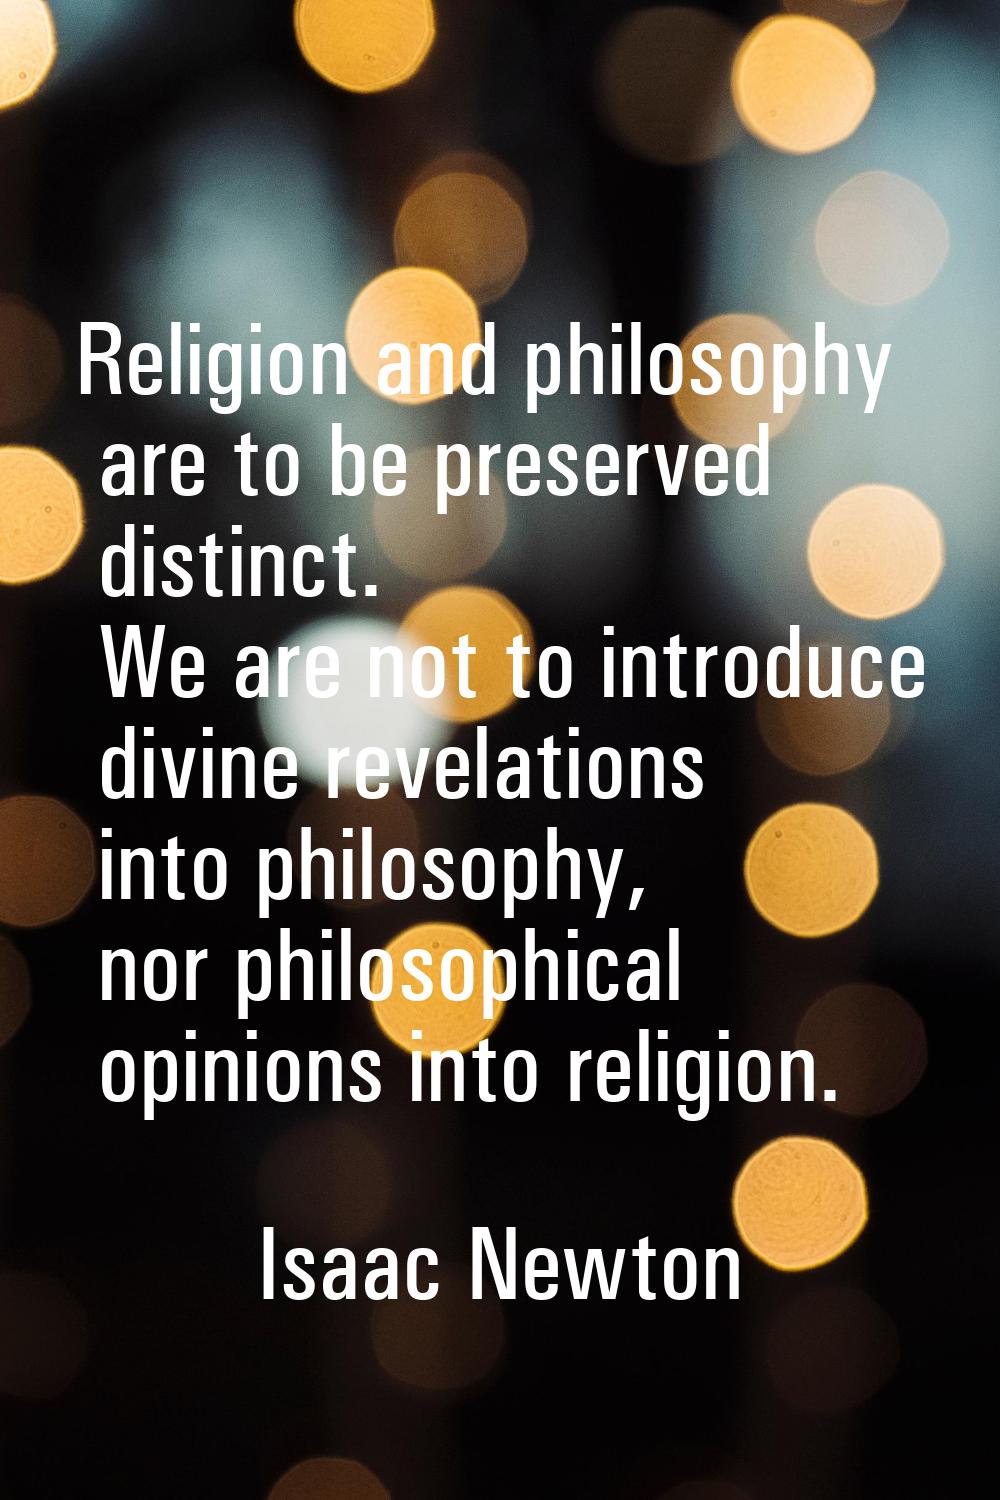 Religion and philosophy are to be preserved distinct. We are not to introduce divine revelations in